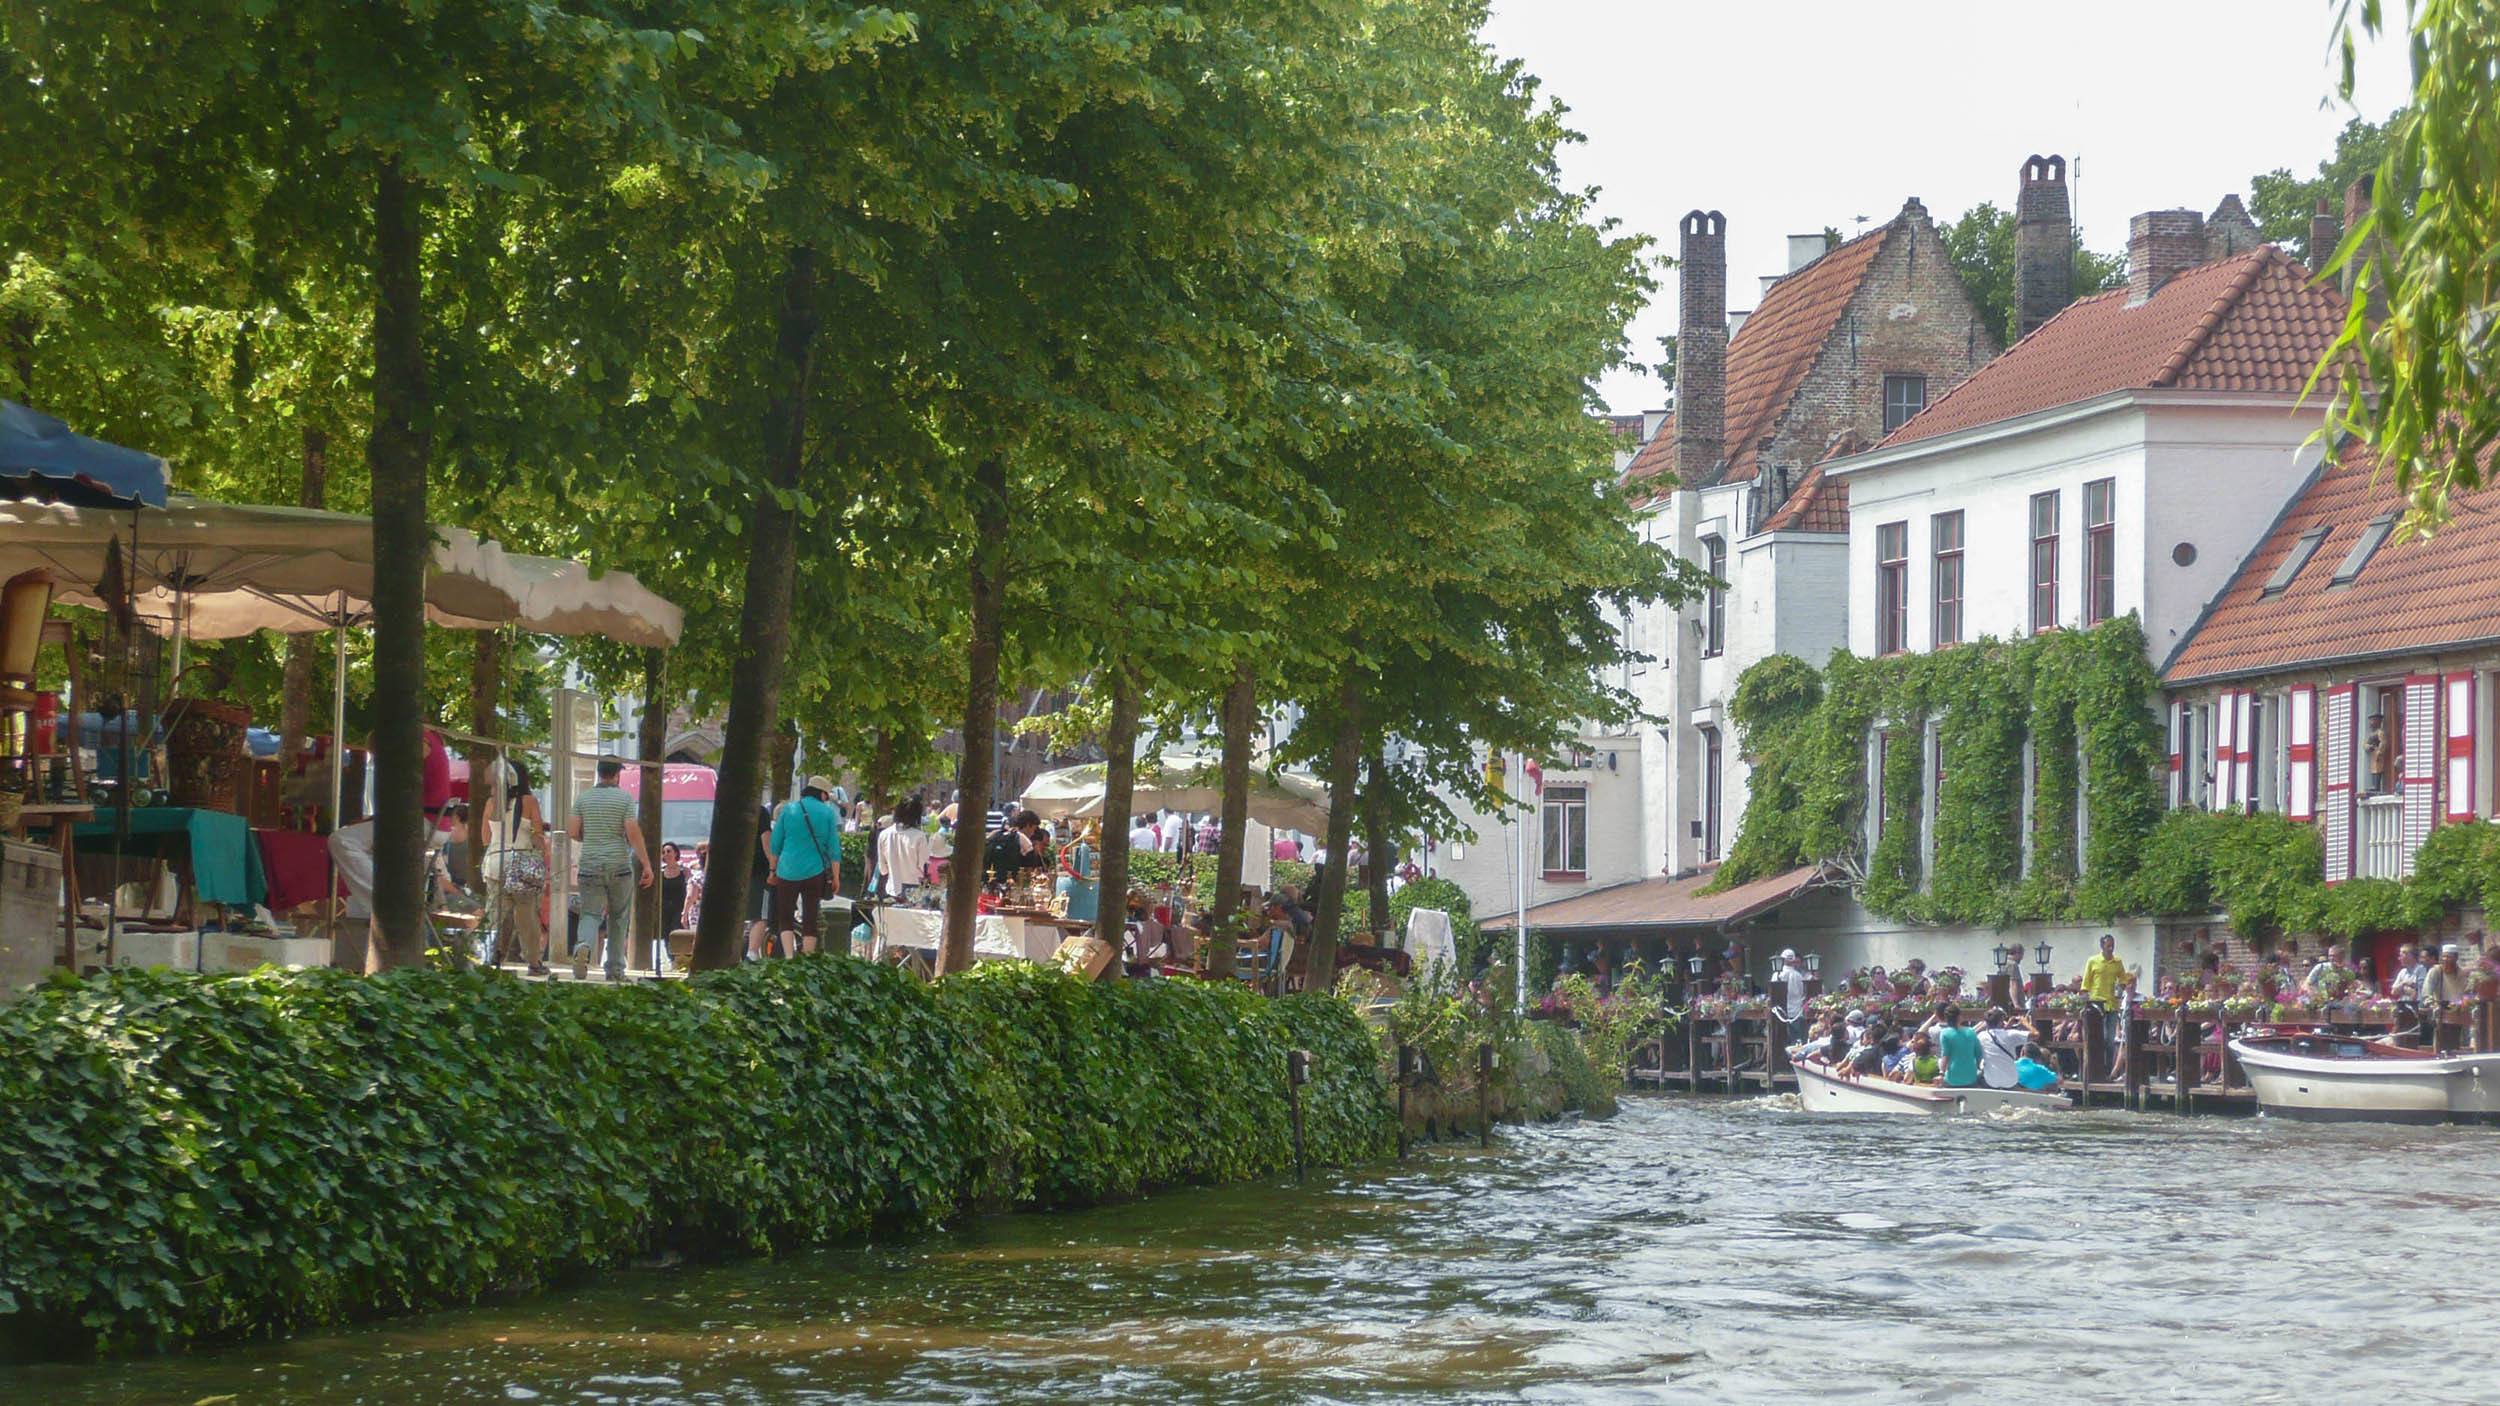 Trees lining the canal in Bruges Belgium